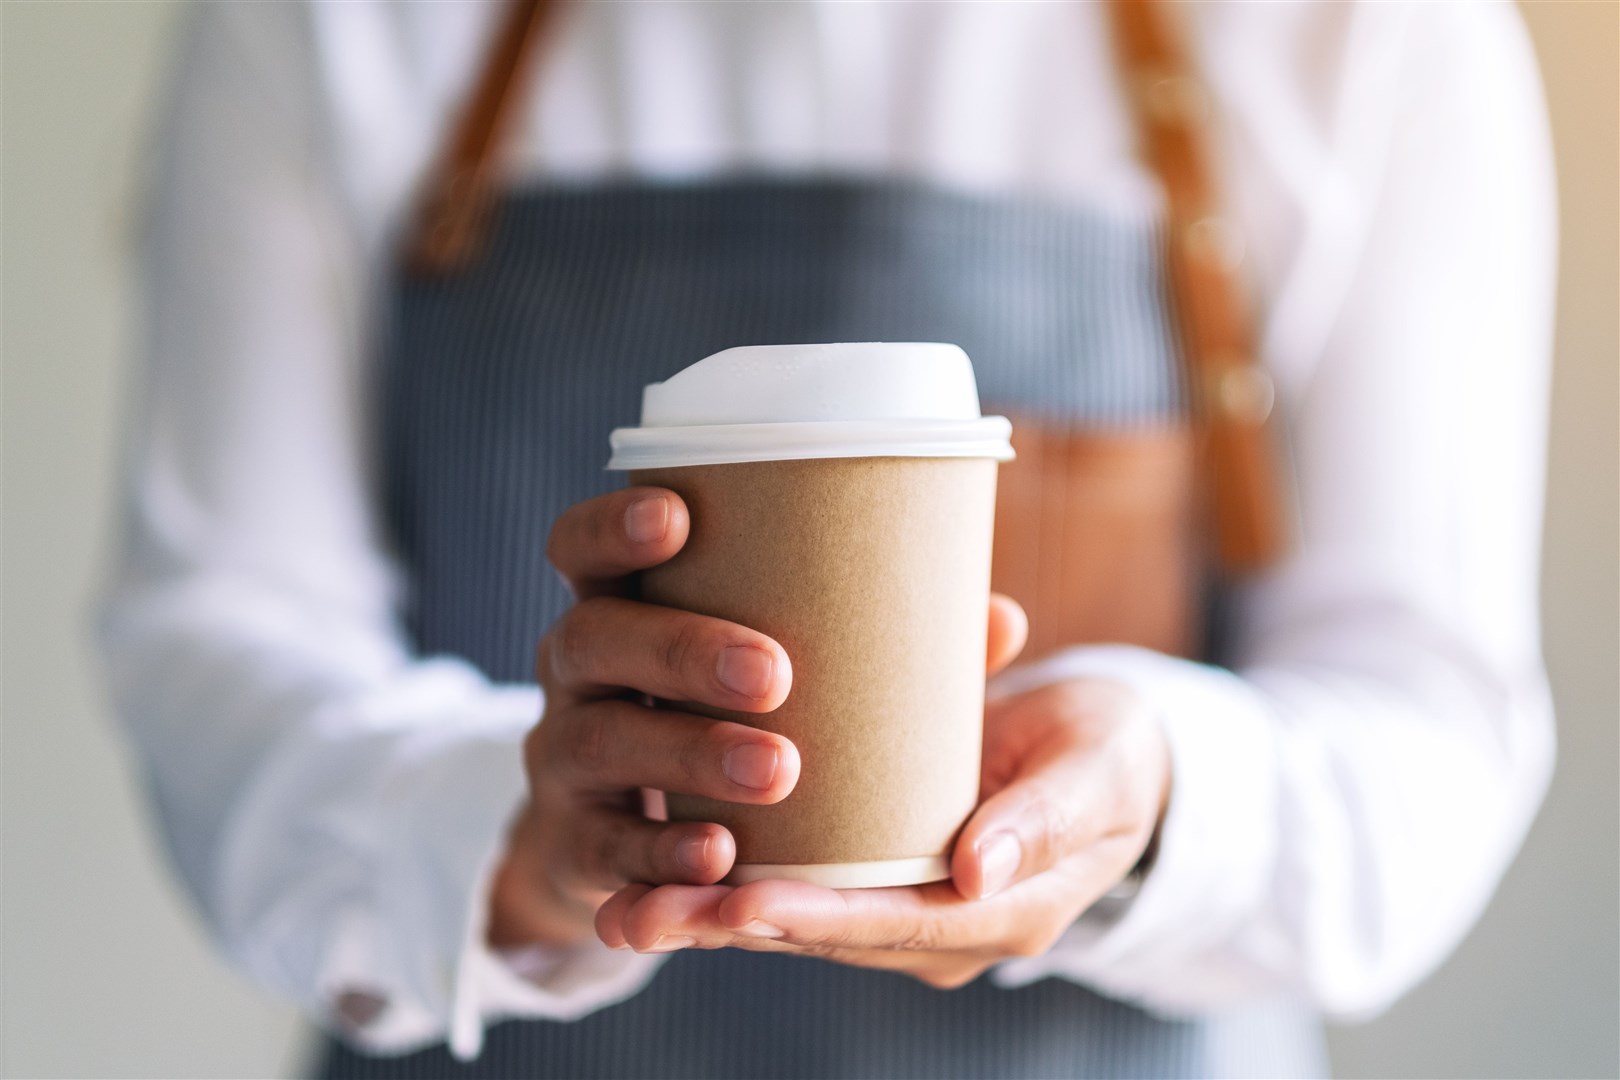 The Circular Economy (Scotland) Bill paves the way for charges on single-use items, dubbed the “latte levy” because disposable cups are first on the list.